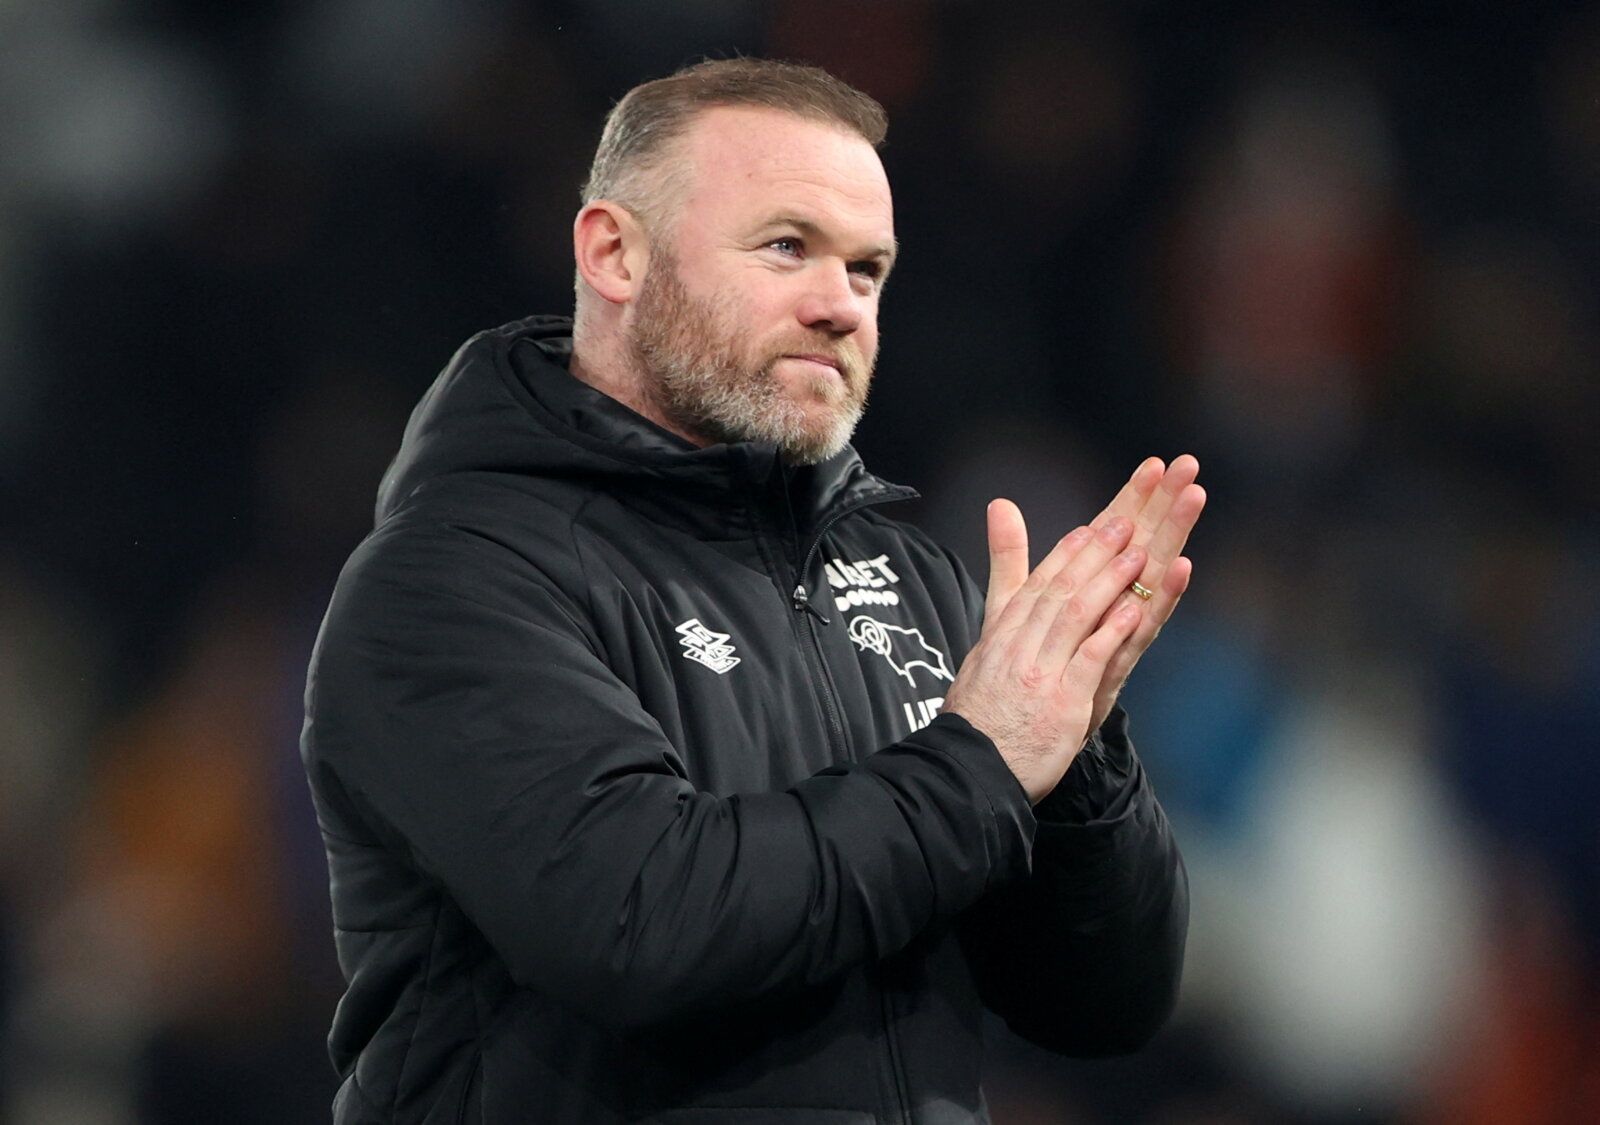 Soccer Football - Championship - Derby County v Millwall - Pride Park, Derby, Britain - February 23, 2022  Derby County's manager, Wayne Rooney after the match   Action Images/Molly Darlington